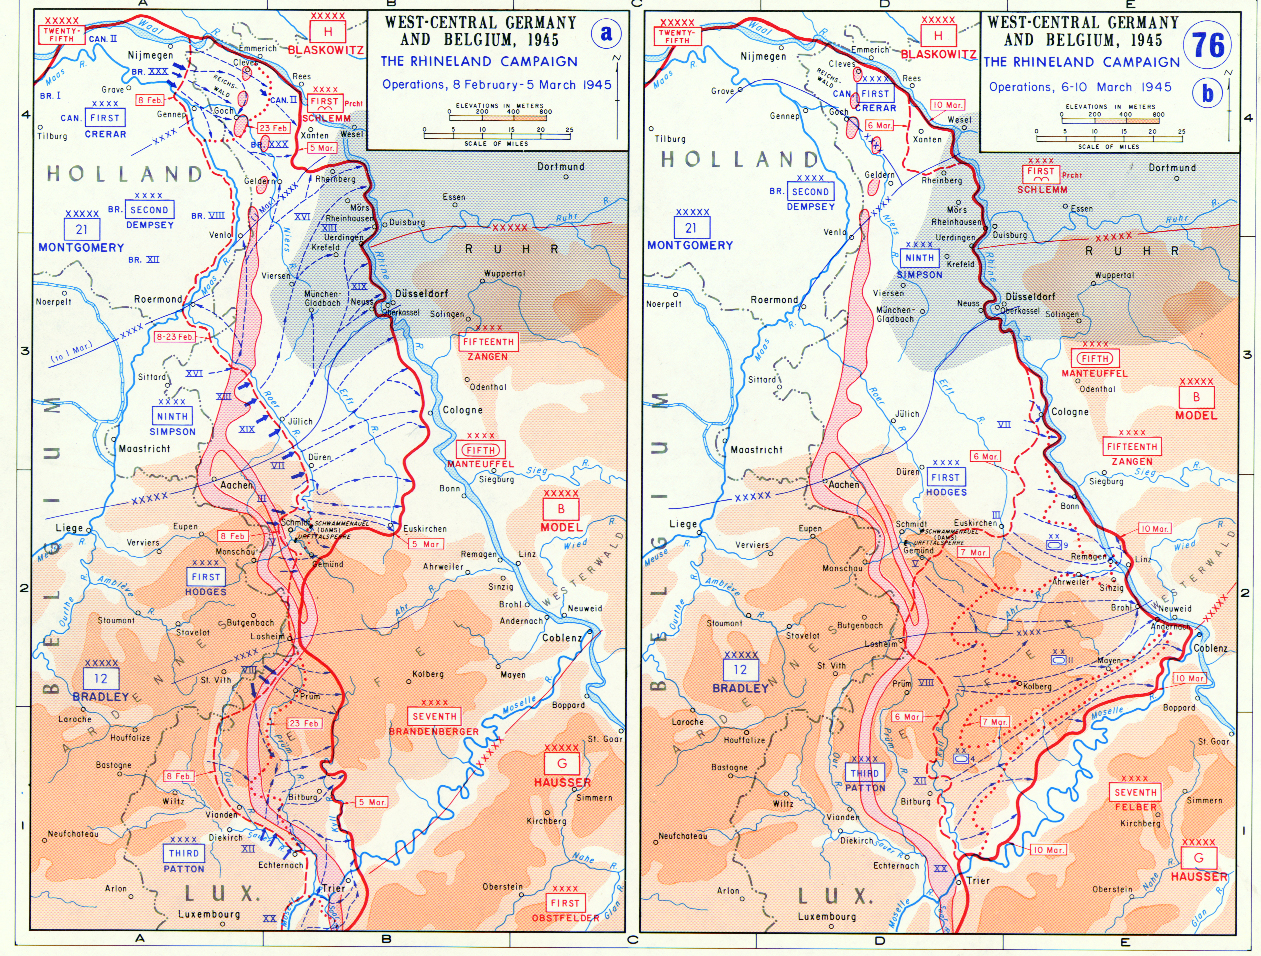 Map depicting the Allied advance to the Rhine River in West-Central Germany and Belgium, 8 Feb-10 Mar 1945